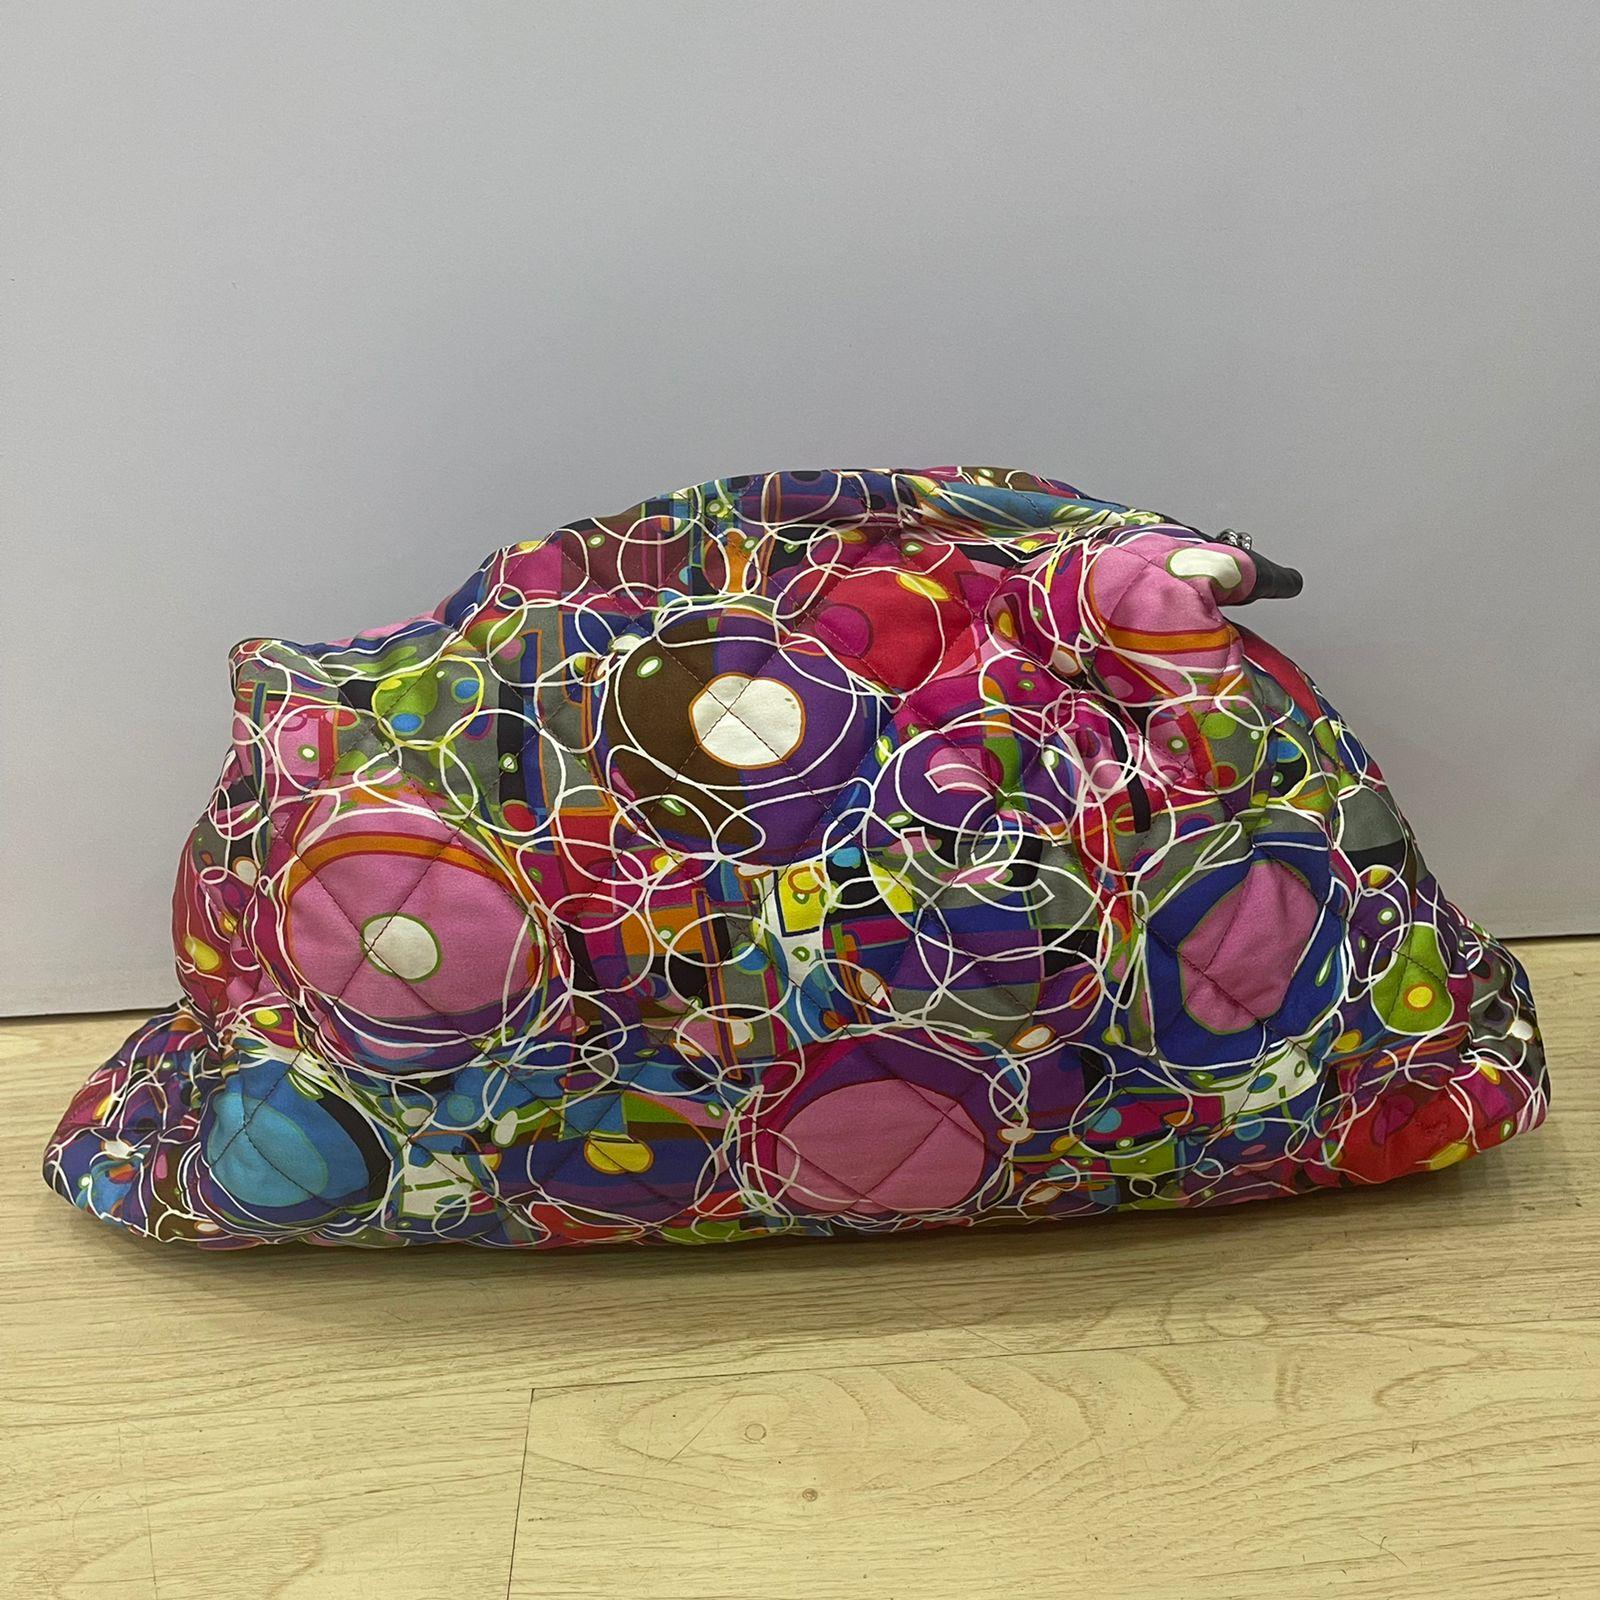 Large kaleidoscope-printed CC satin bag in good condition. Item comes as it is. Visible marks on the rim of the zip-line as shown on the pictures. Light and supple model, suitable for diaper bag or travel bag! Overall in good but worn condition.